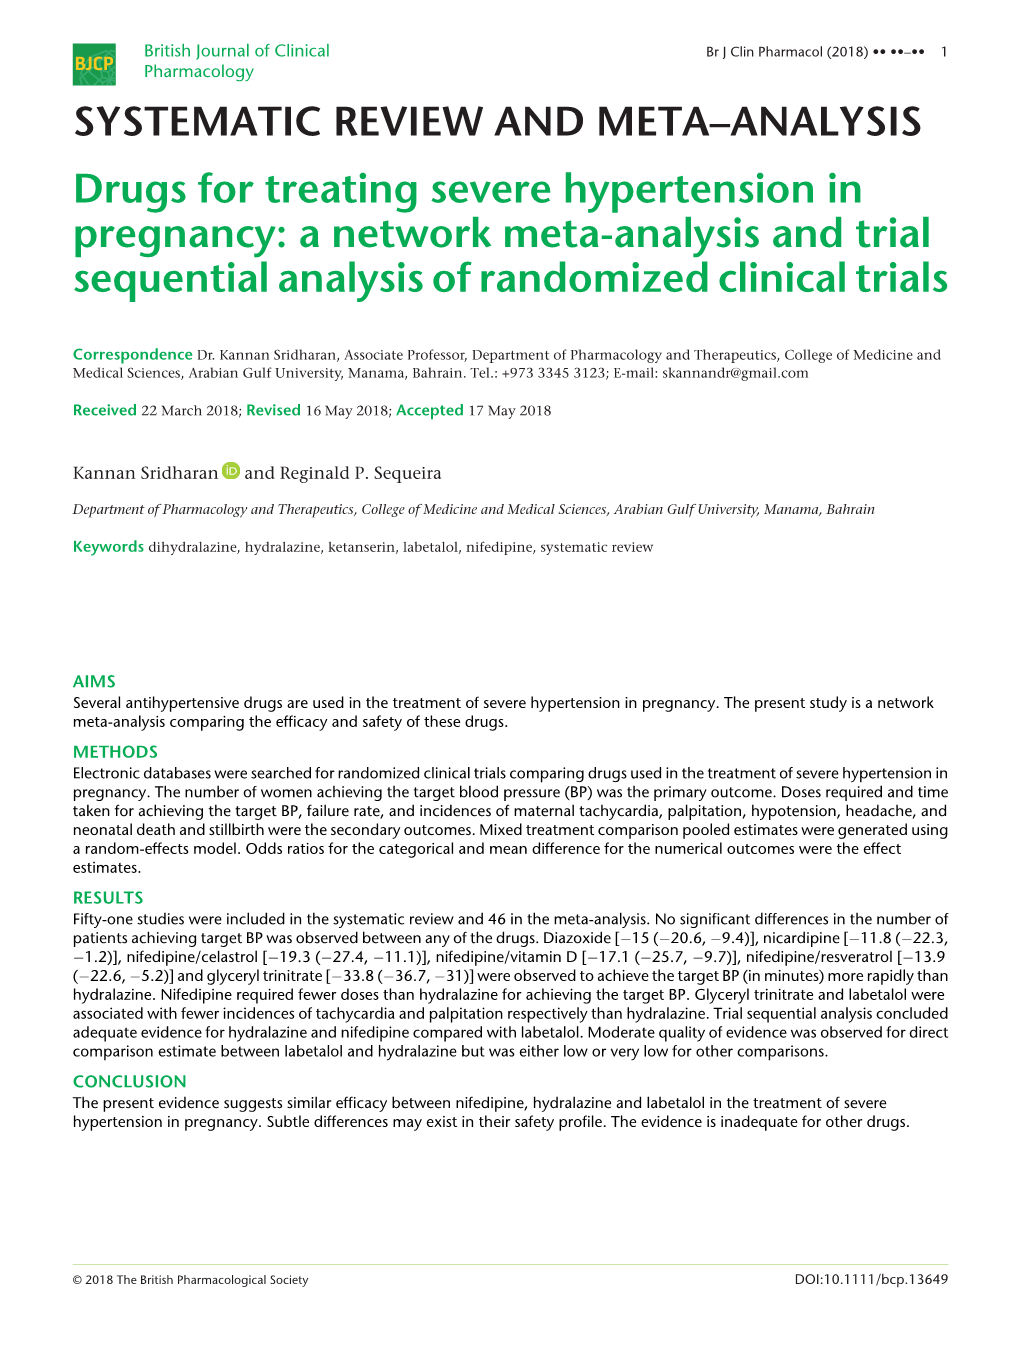 Drugs for Treating Severe Hypertension in Pregnancy: a Network Meta-Analysis and Trial Sequential Analysis of Randomized Clinical Trials